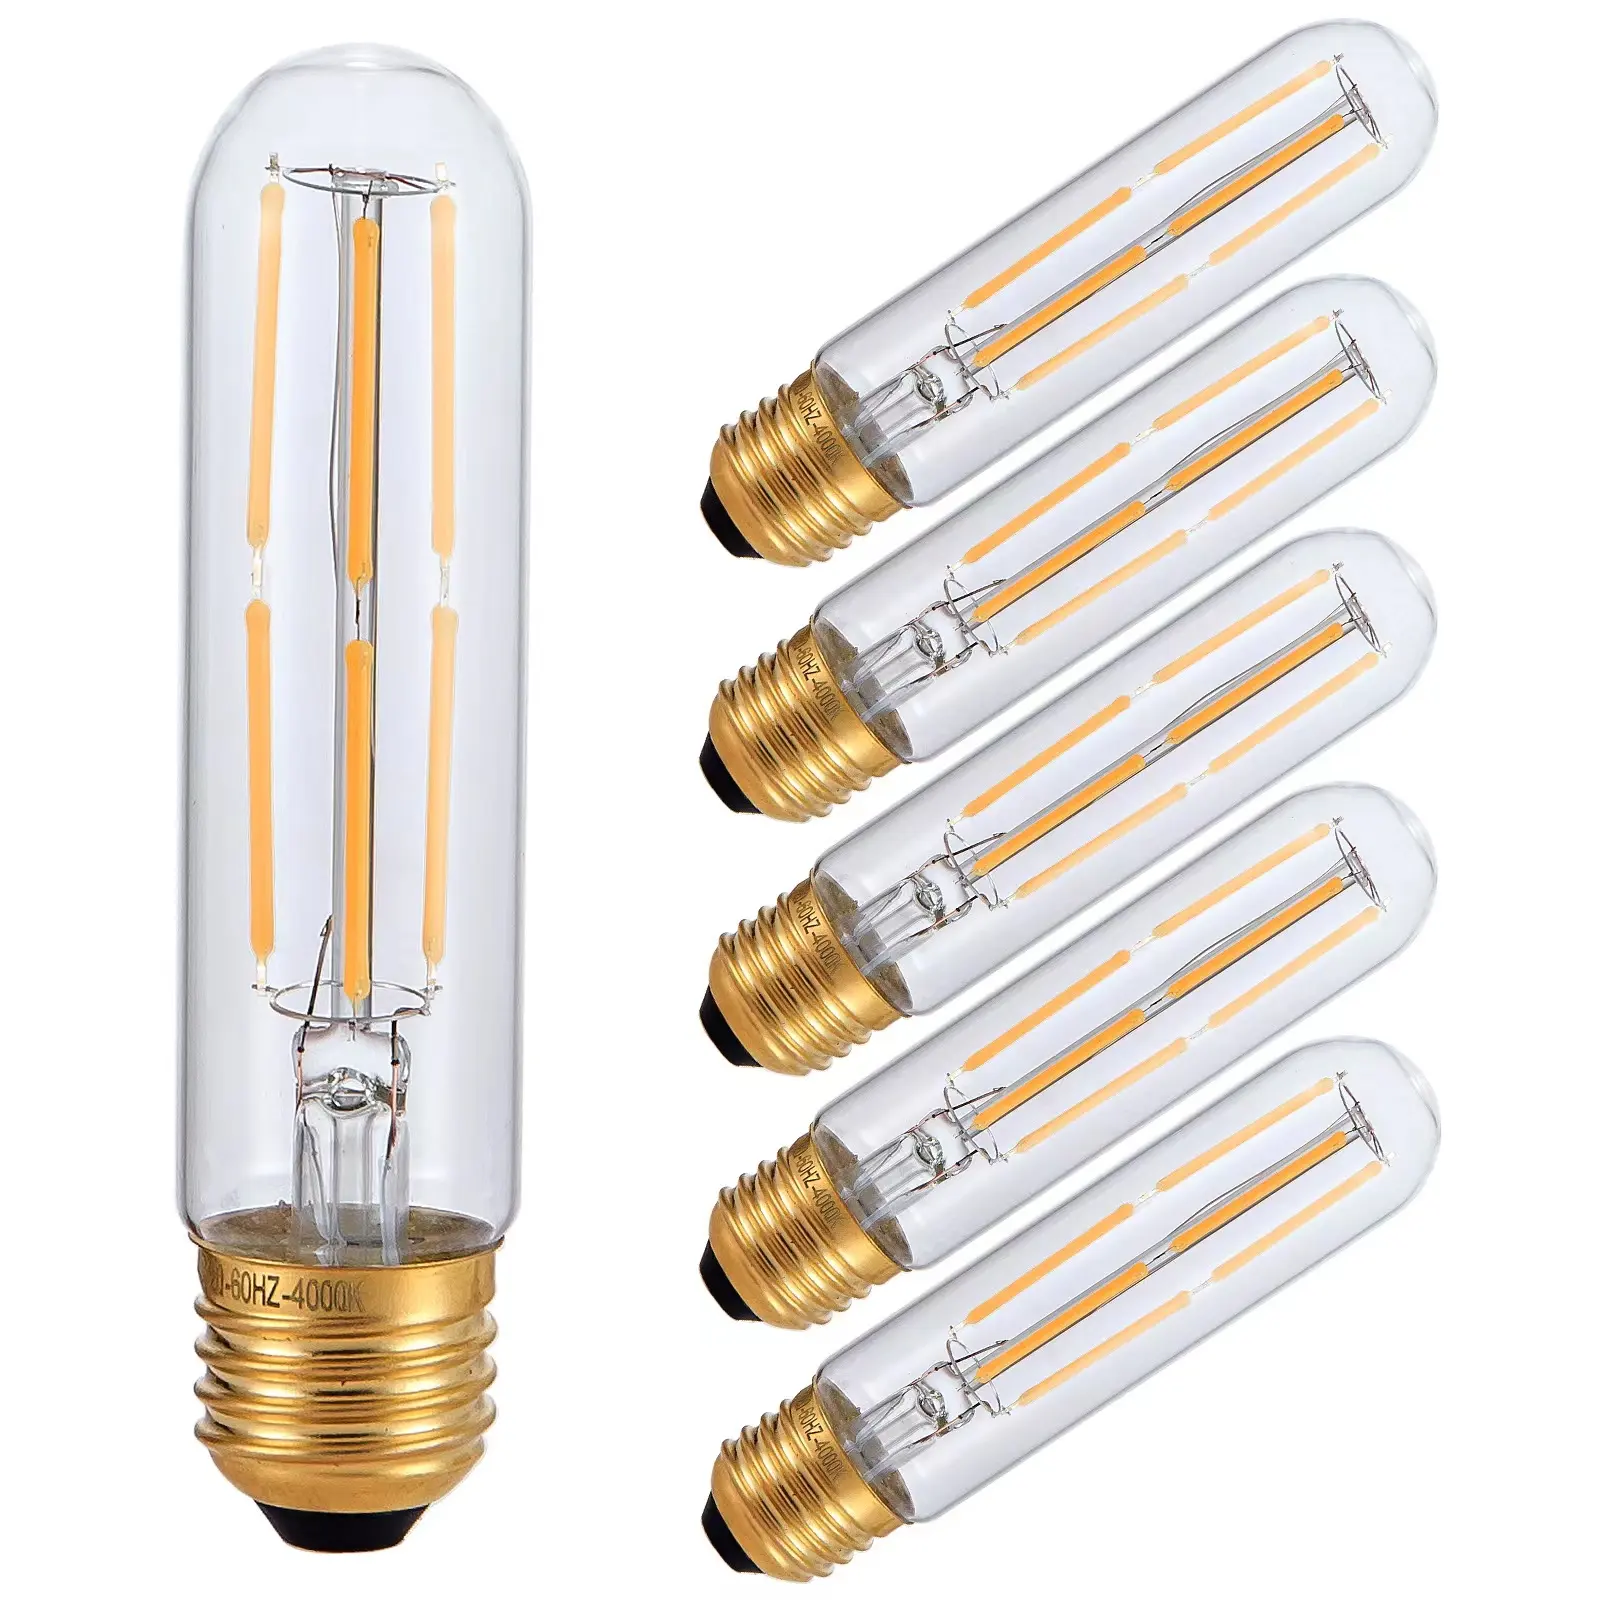 T10 Led Bulb Dimmable 8W Led Tubular Bulbs 3000K Soft White Clear Glass E26 Base Lamp Bulb For Cabinet Display Cabinet